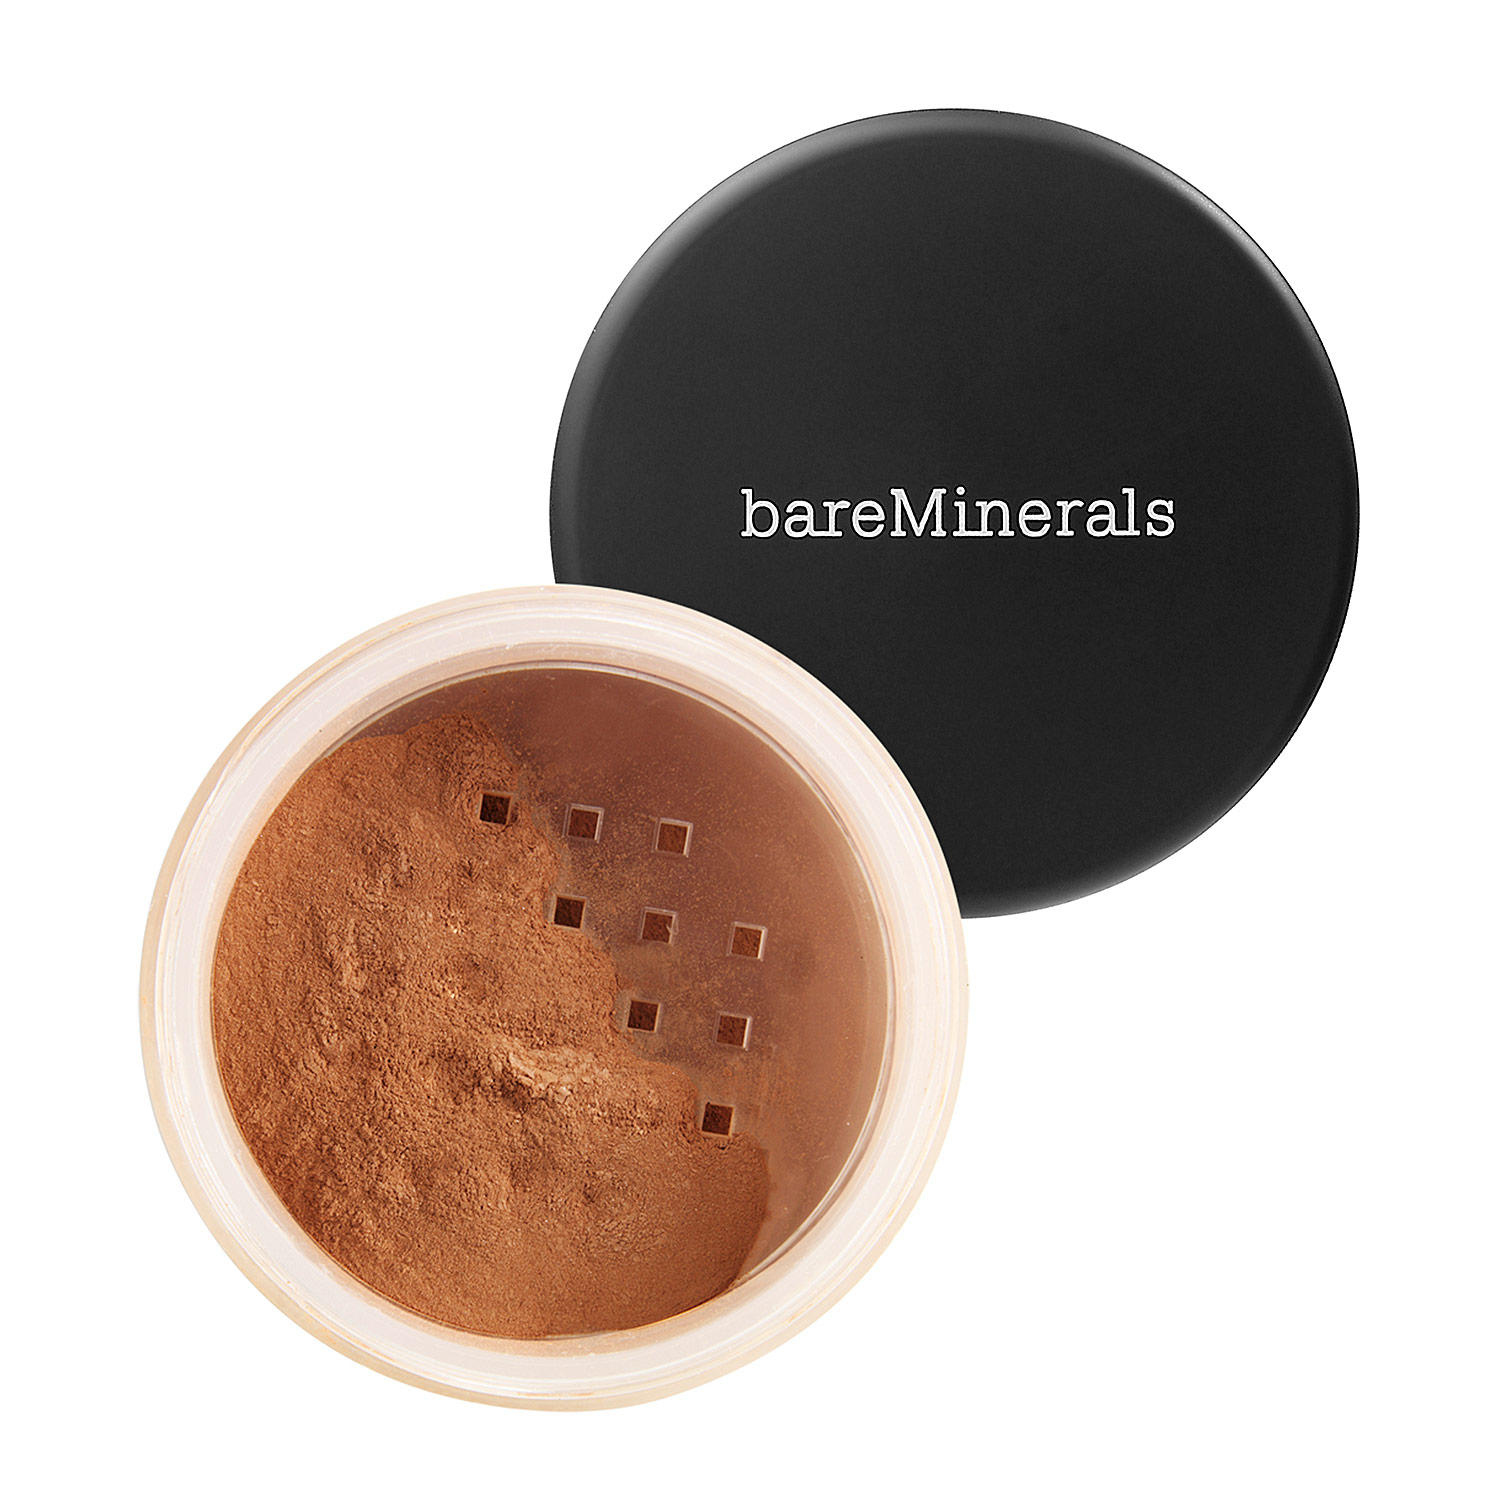 bareMinerals All-Over Face Color Warmth 1.5g